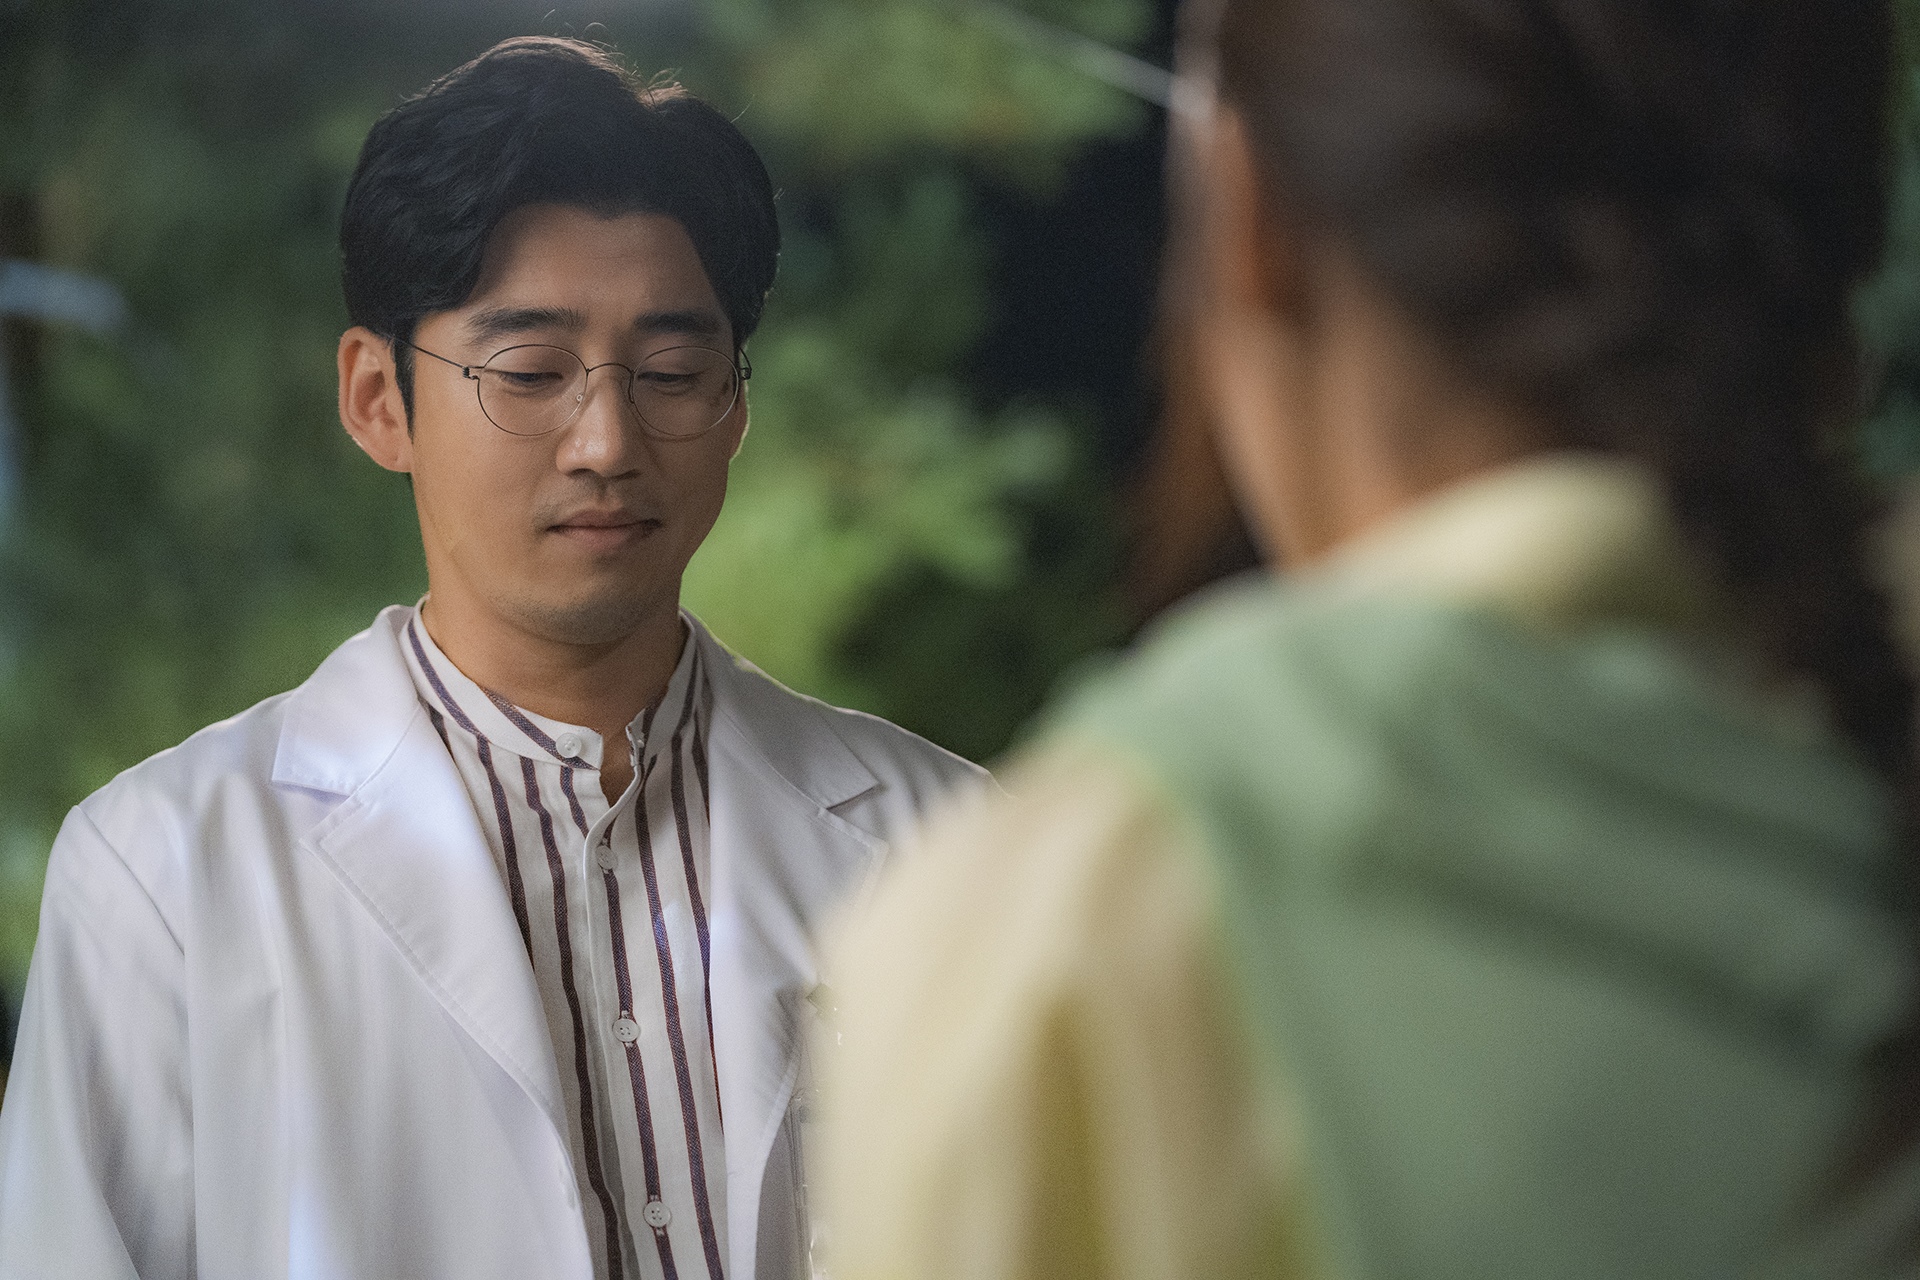 There has been a thrilling change in the streets of Chocolates Yoon Kye-sang and Ha Ji-won.JTBC gilt drama Chocolate (directed by Lee Hyung-min, playwright Lee Kyung-hee, production drama House and JYP Pictures) released the romantic eye contact of Yi Gang (Yoon Kye-sang) and Moon Cha-young (Ha Ji-won) on the 28th, raising the thrilling index.Here, Lee Joon (Jang Seung-jo), who sits side by side, captures the image of Lee Gang looking at Moon Cha-young, and amplifies their curiosity about their relationship change.Chocolate, which conveys warm comfort and sympathy with its delicateness and deep insight into life that captures the texture of emotions, opened its second act on the 9th broadcast on the 27th.While Lee Kang was aware of the attraction toward Moon Cha-young, the feelings of the two people that have been accumulated have begun to deepen and have made a sad feeling.Lee Joon, who was staying in a giant hospice as a community service here, was stimulating the Jealousness of the river.Lee Joons appearance raised expectations about what variables will affect the romance of Lee Kang and Moon Cha Young, who realized their hearts.The romantic eye contact between Lee Gang and Moon Cha-young in the photo released on the day is more intense than ever before.A single step still exists between the two, but the eyes that look at each other are deep.The deep eyes of Lee and Moon Cha-young, who look at each other, seem to leak out hearts that they can not convey. Moon Cha-young and Lee Joon are also closer.It is sweet to sit side by side and listen to each others stories, and it makes me wonder about the relationship change of the three people in the complex face of the river that can not approach and watch.Lee Kangs fate rival Lee Joon appeared to accelerate the feelings of Lee Kang and Moon Cha Young.The production team of Chocolate said, With the beginning of the second act, the sweet and sour romance of Lee Kang and Moon Cha Young also changed in earnest.Im aware of my mind, but I want you to expect how Lee Gang, who is not getting close to me, will approach Moon Cha-young.On the other hand, netizens are going to be happy with Yoon Kye-sang is so cool and so happy with Cha Young-yi, I am so excited about the charm of Yoon Kye-sang and waiting for gold and vomit, I am so good at acting and heartbeatI feel so sorry for the 16-episode series. Today (28th) is broadcast 10:50 p.m.iMBC Kim Hye-young  Photo Drama House, JYP Pictures